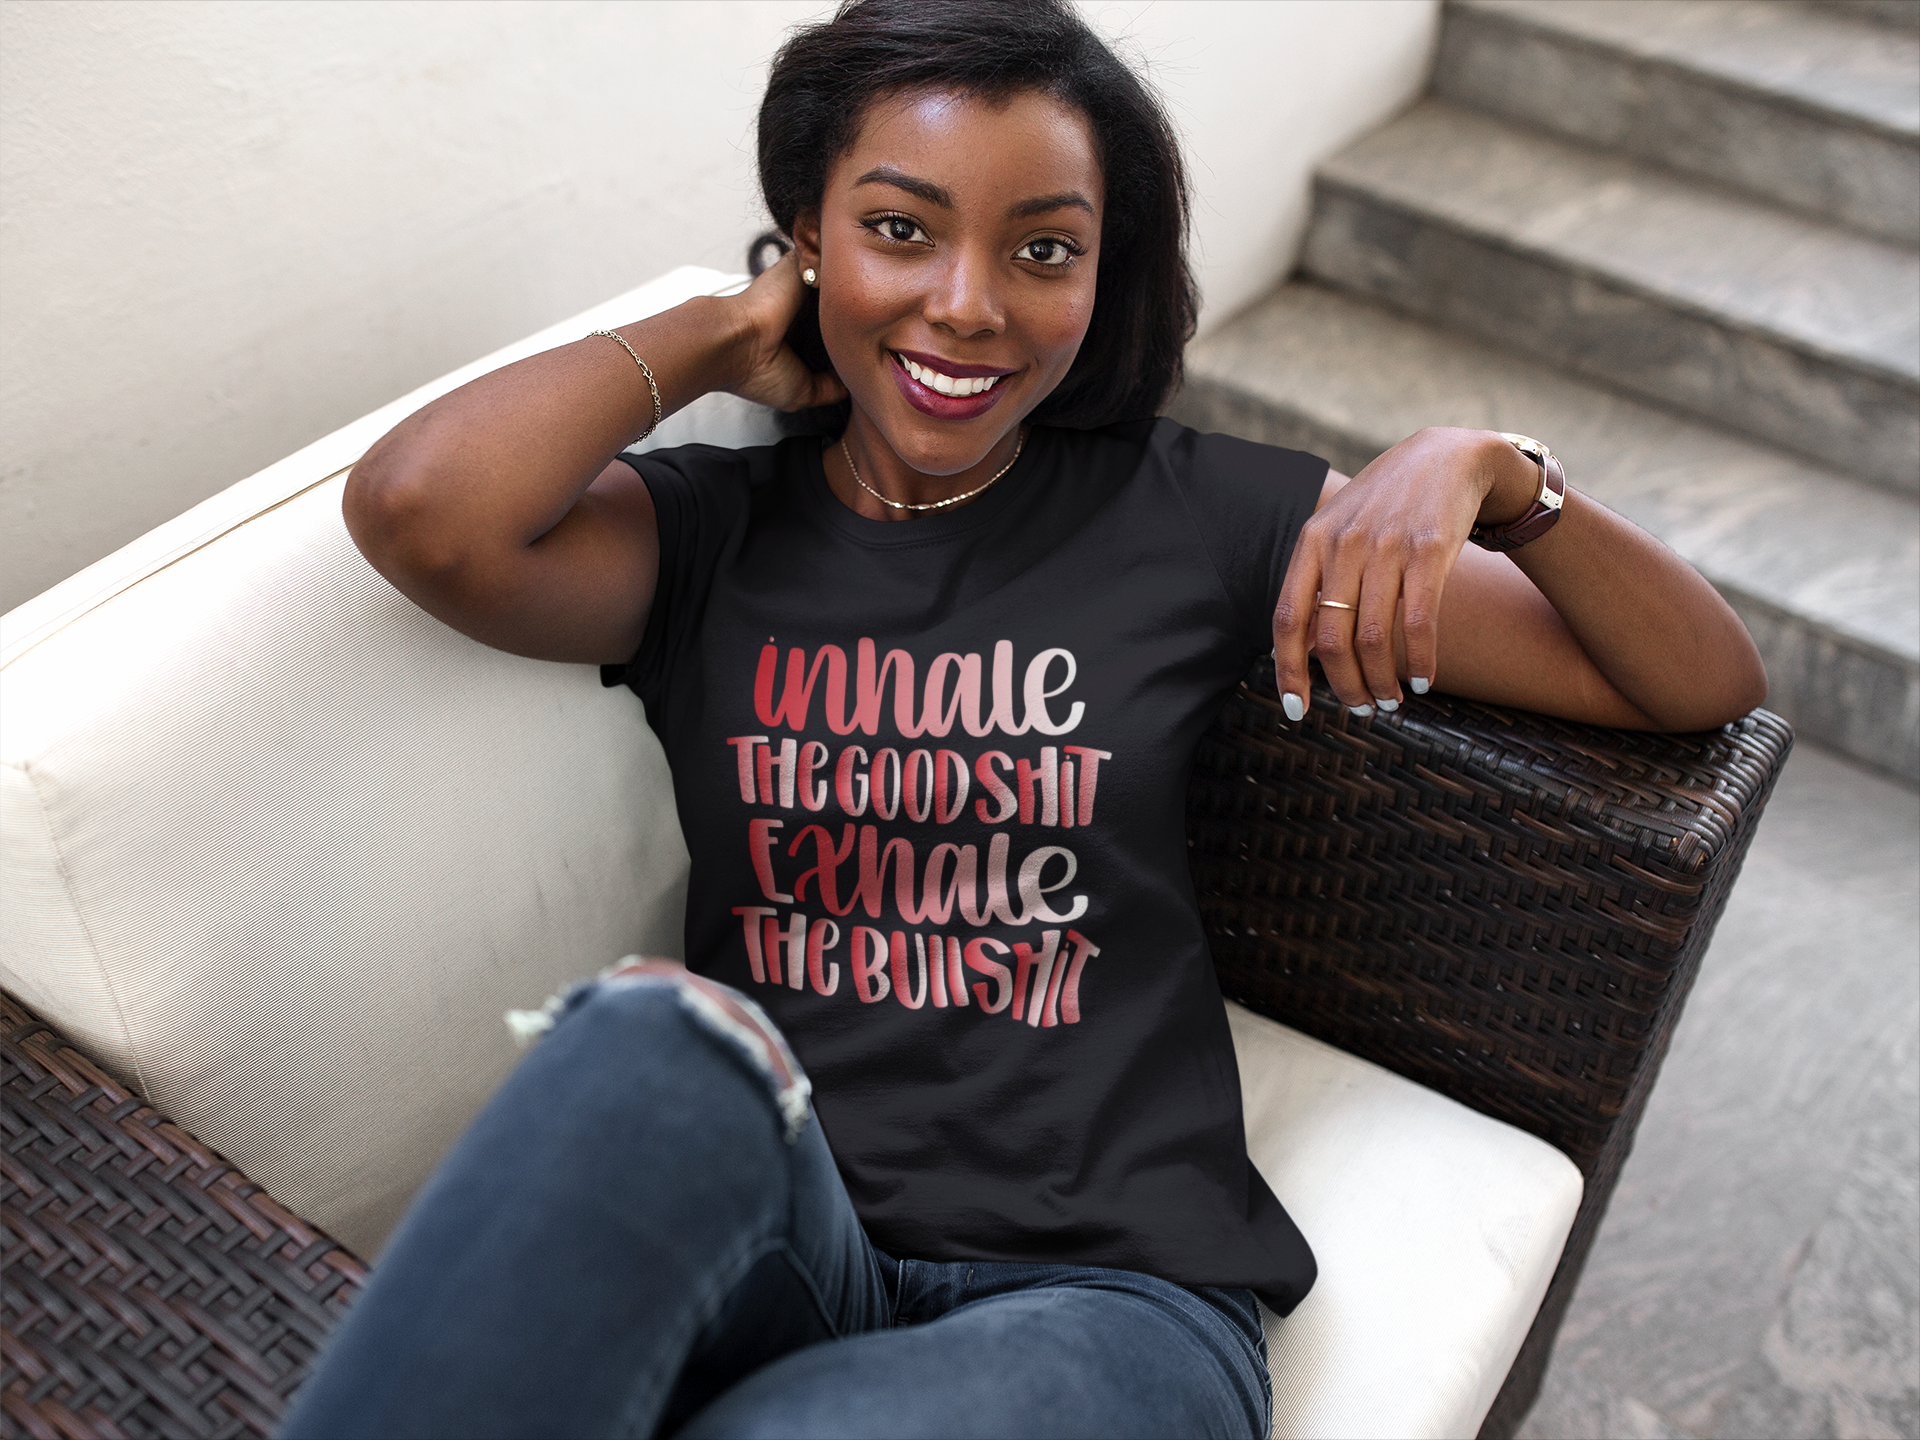 Inhale The Good Shit Exhale The Bullshit Women Unisex t-shirt, Red and White Ladies Fit Shirt